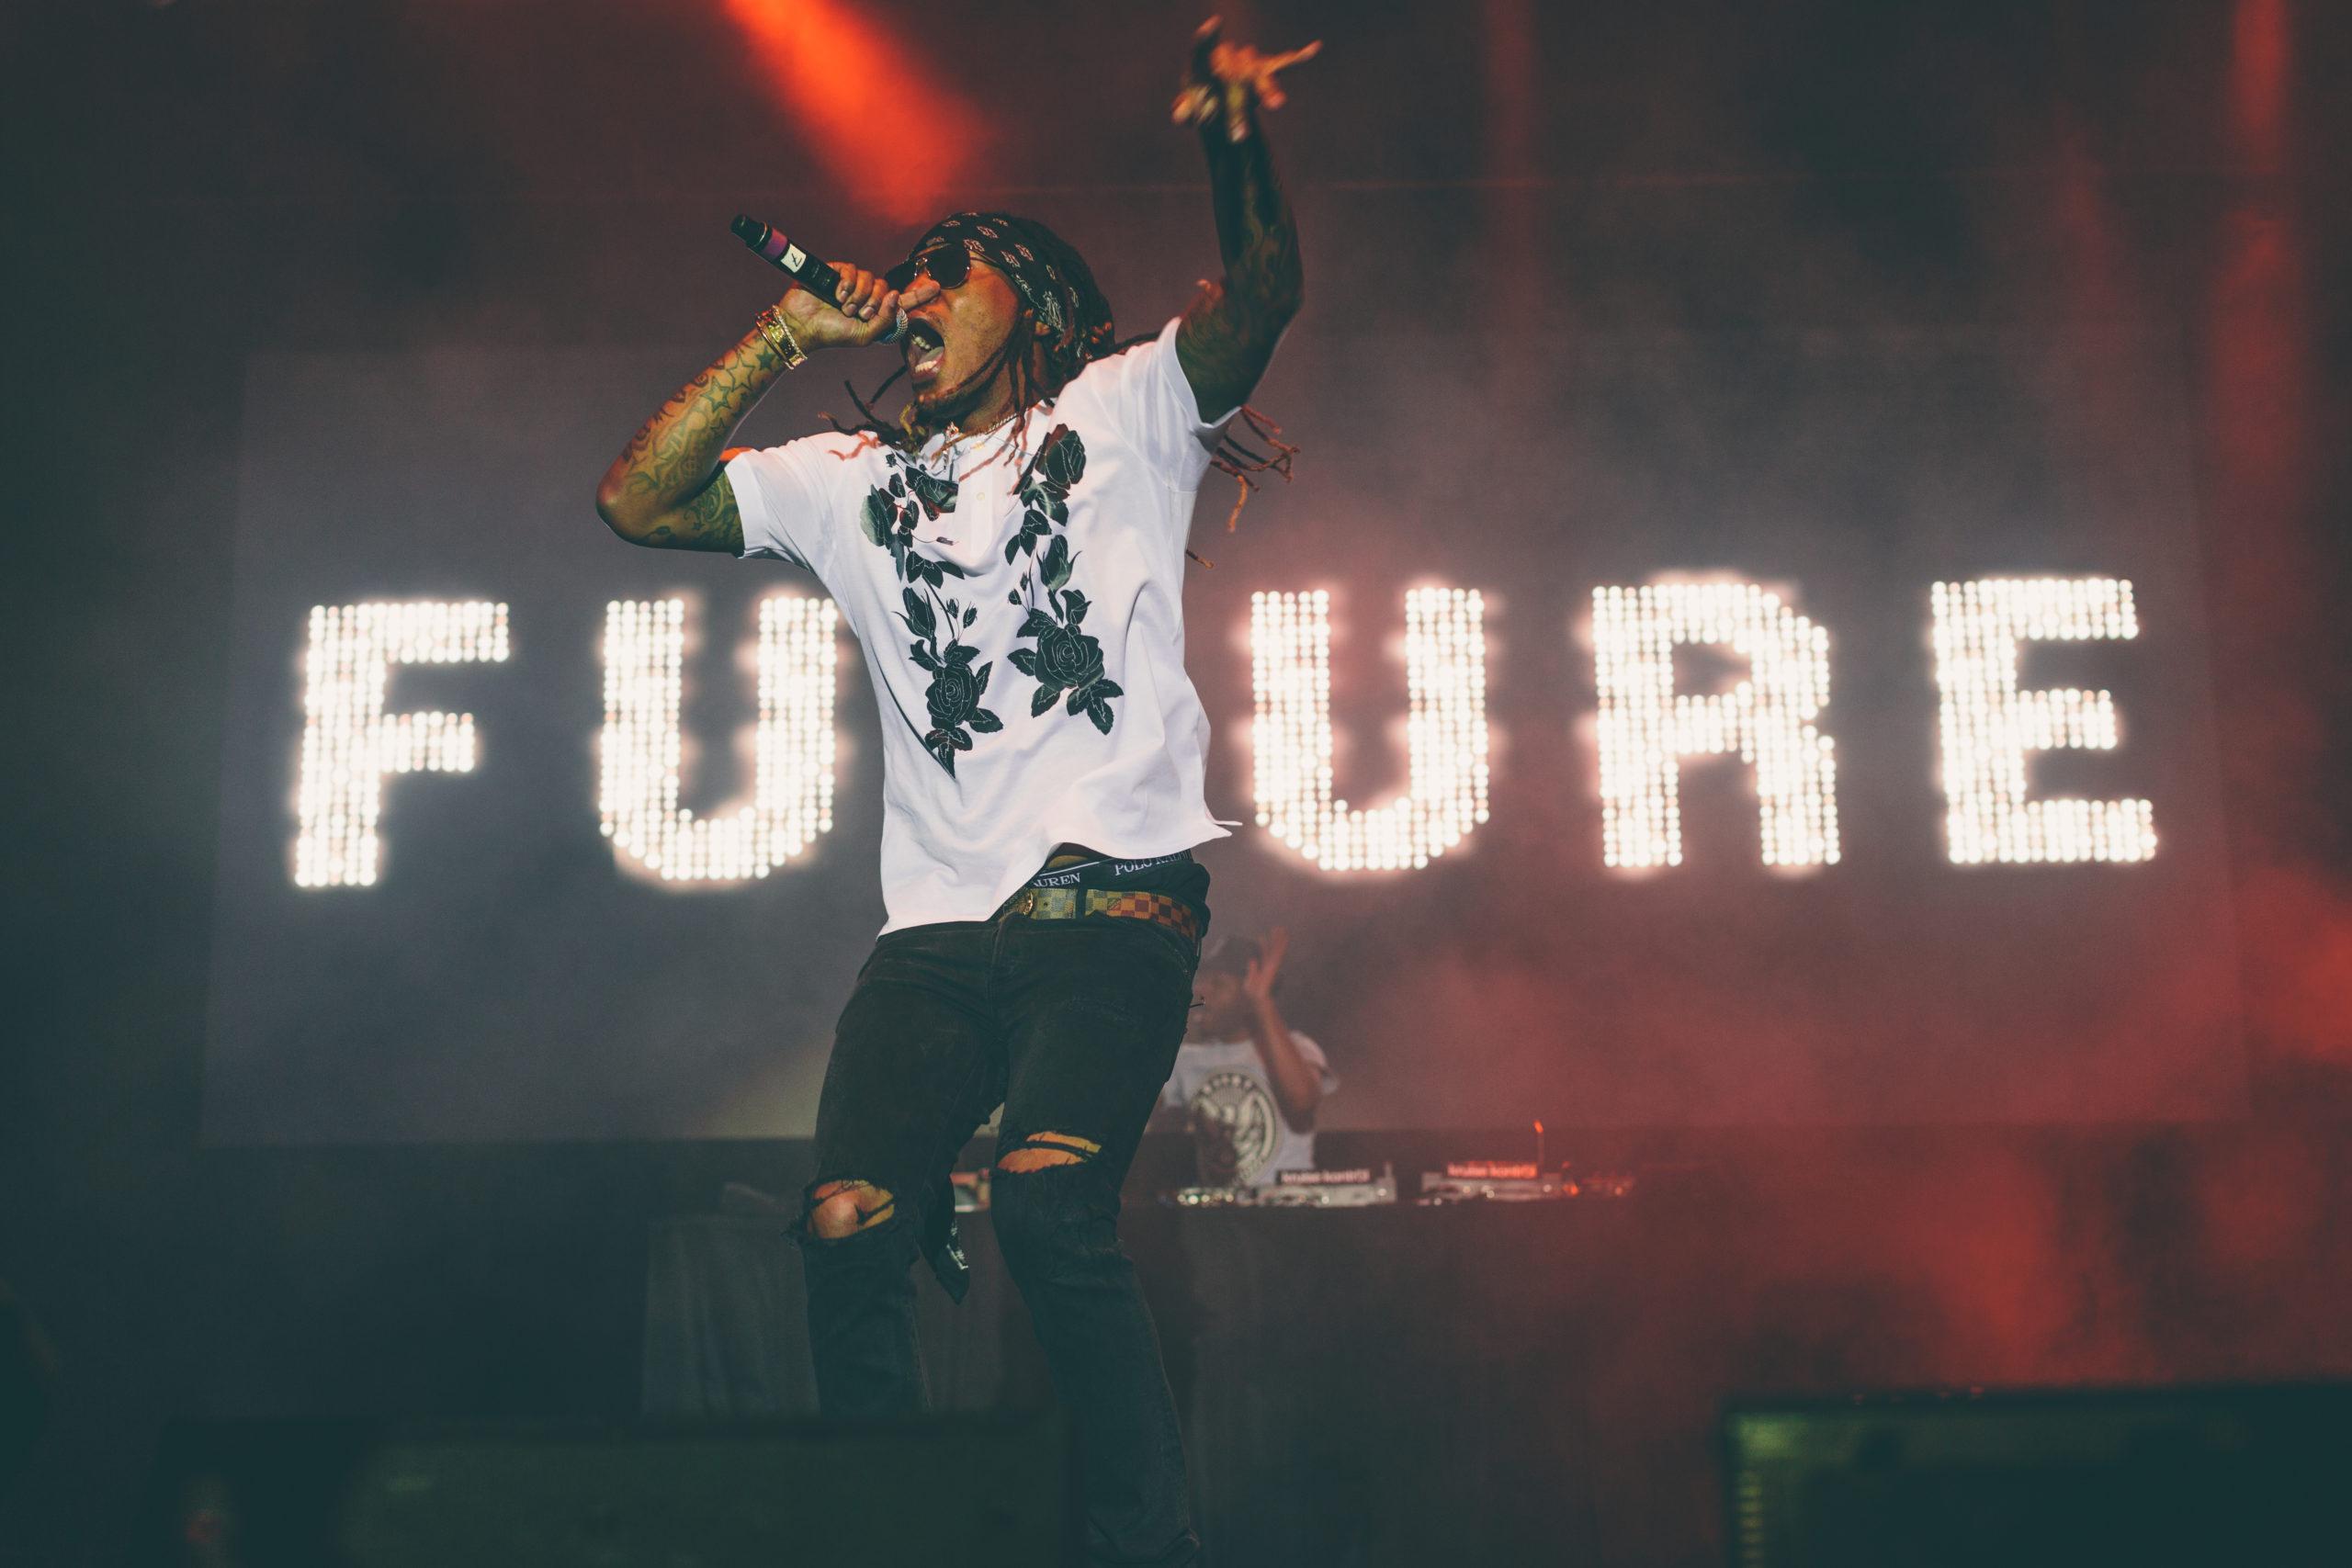 Future%2C+Post+Malone%2C+Rae+Sremmurd%2C+and+many+more+took+over+Dallas+Fair+Park+on+May+13.+